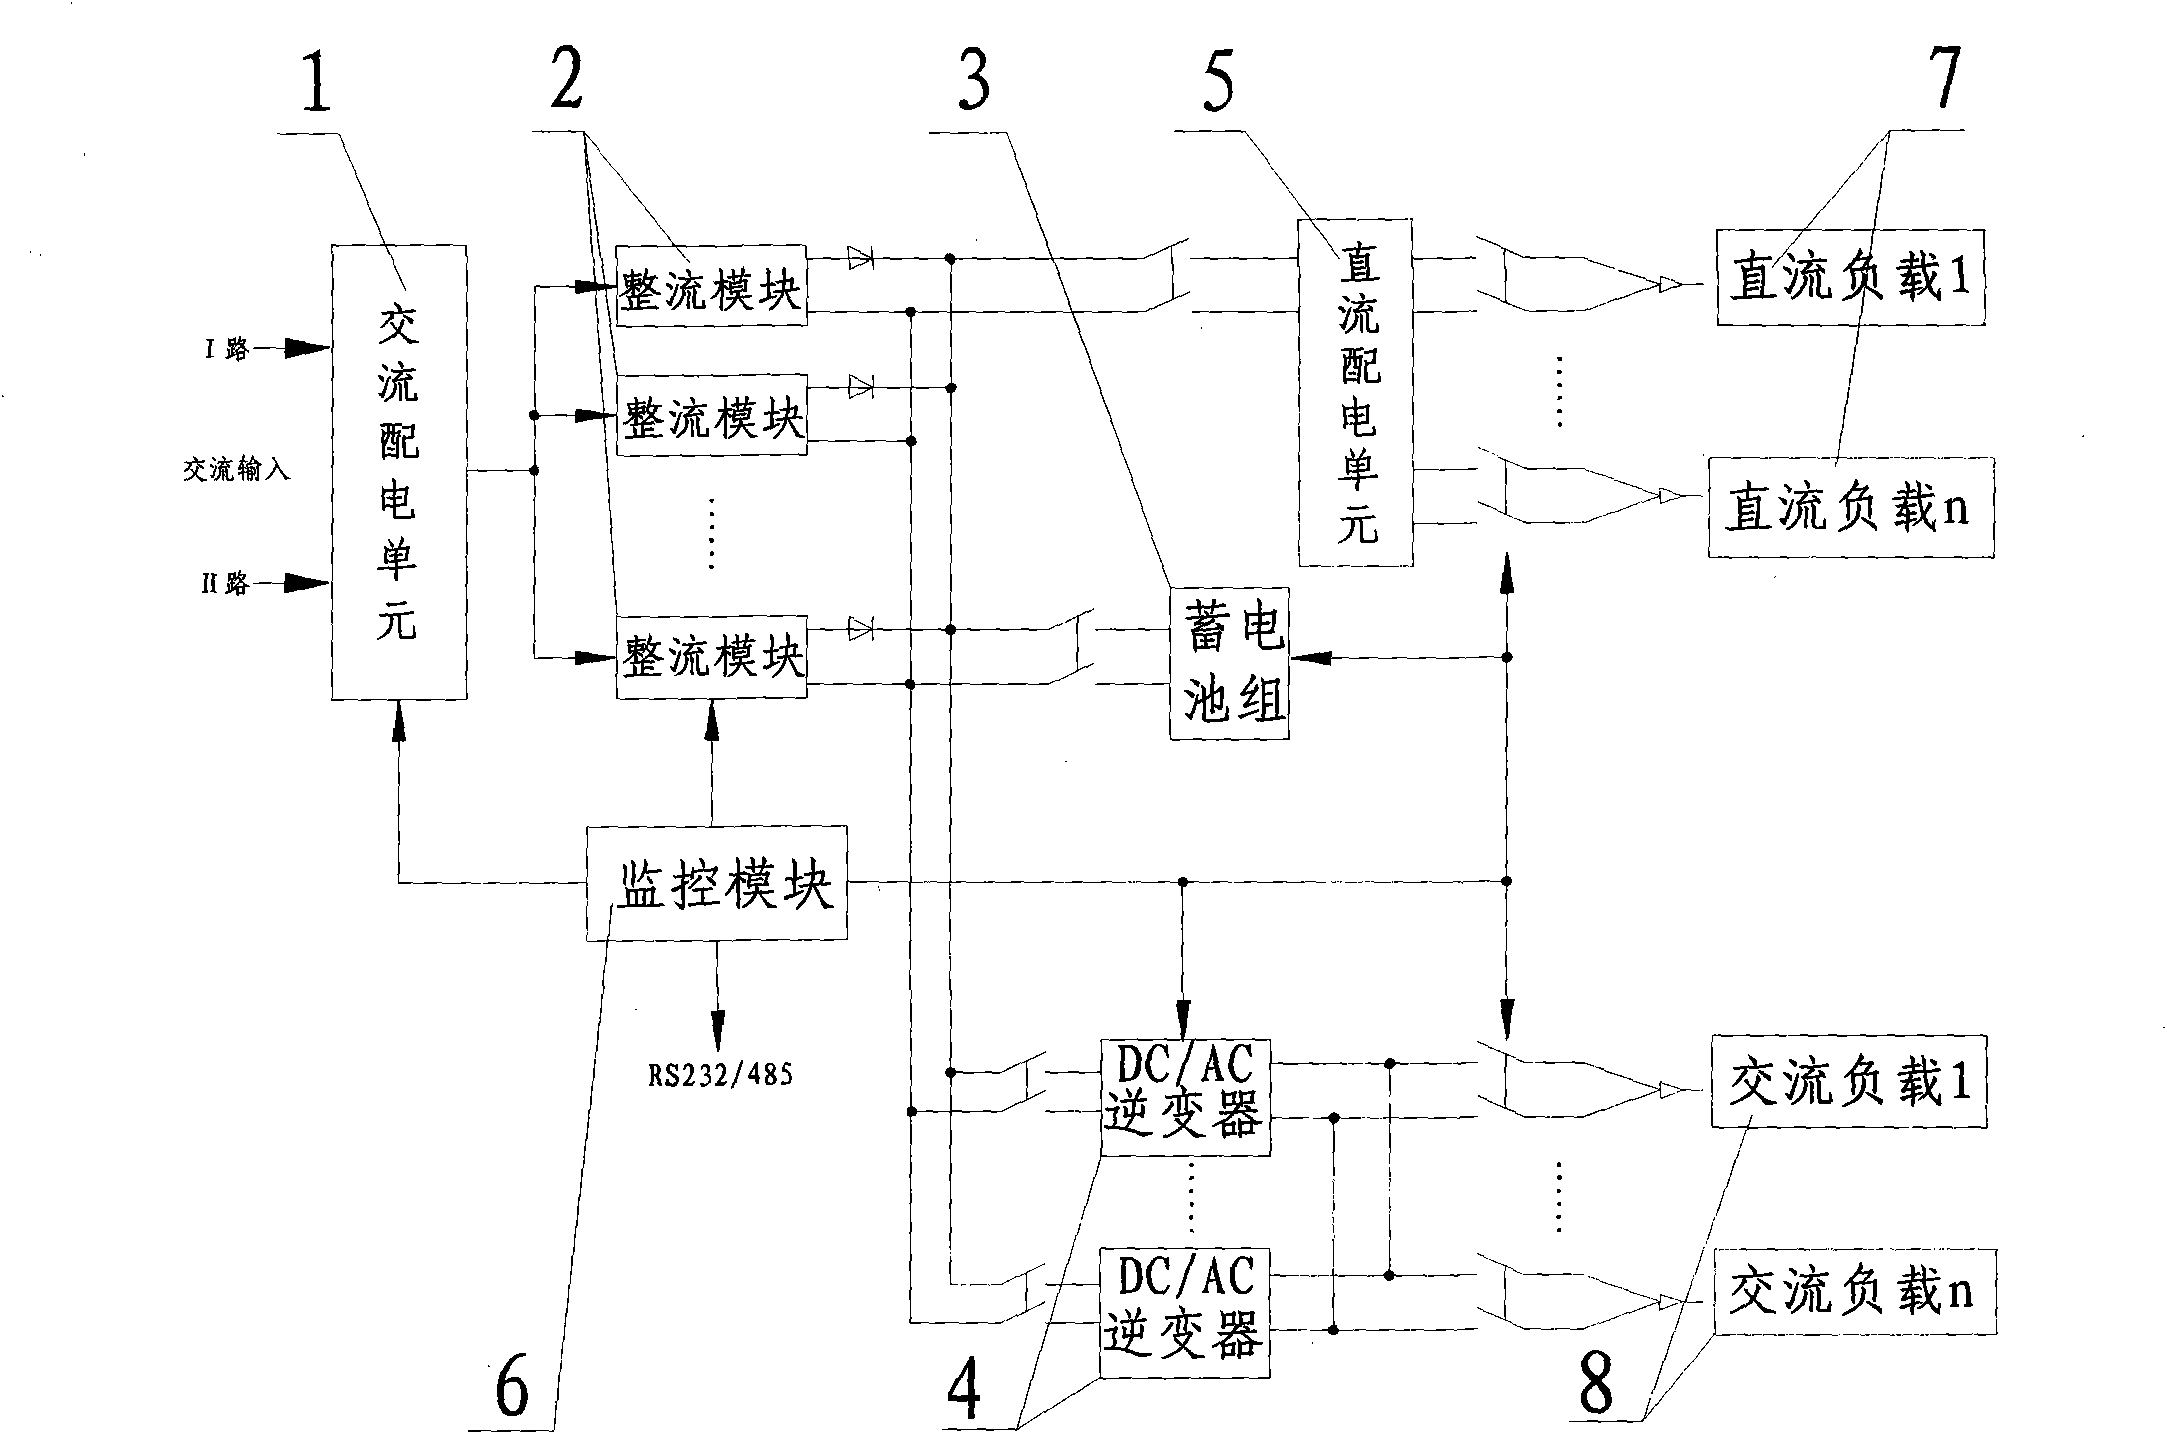 High voltage direct current power supply system for both alternating current purpose and direct current purpose